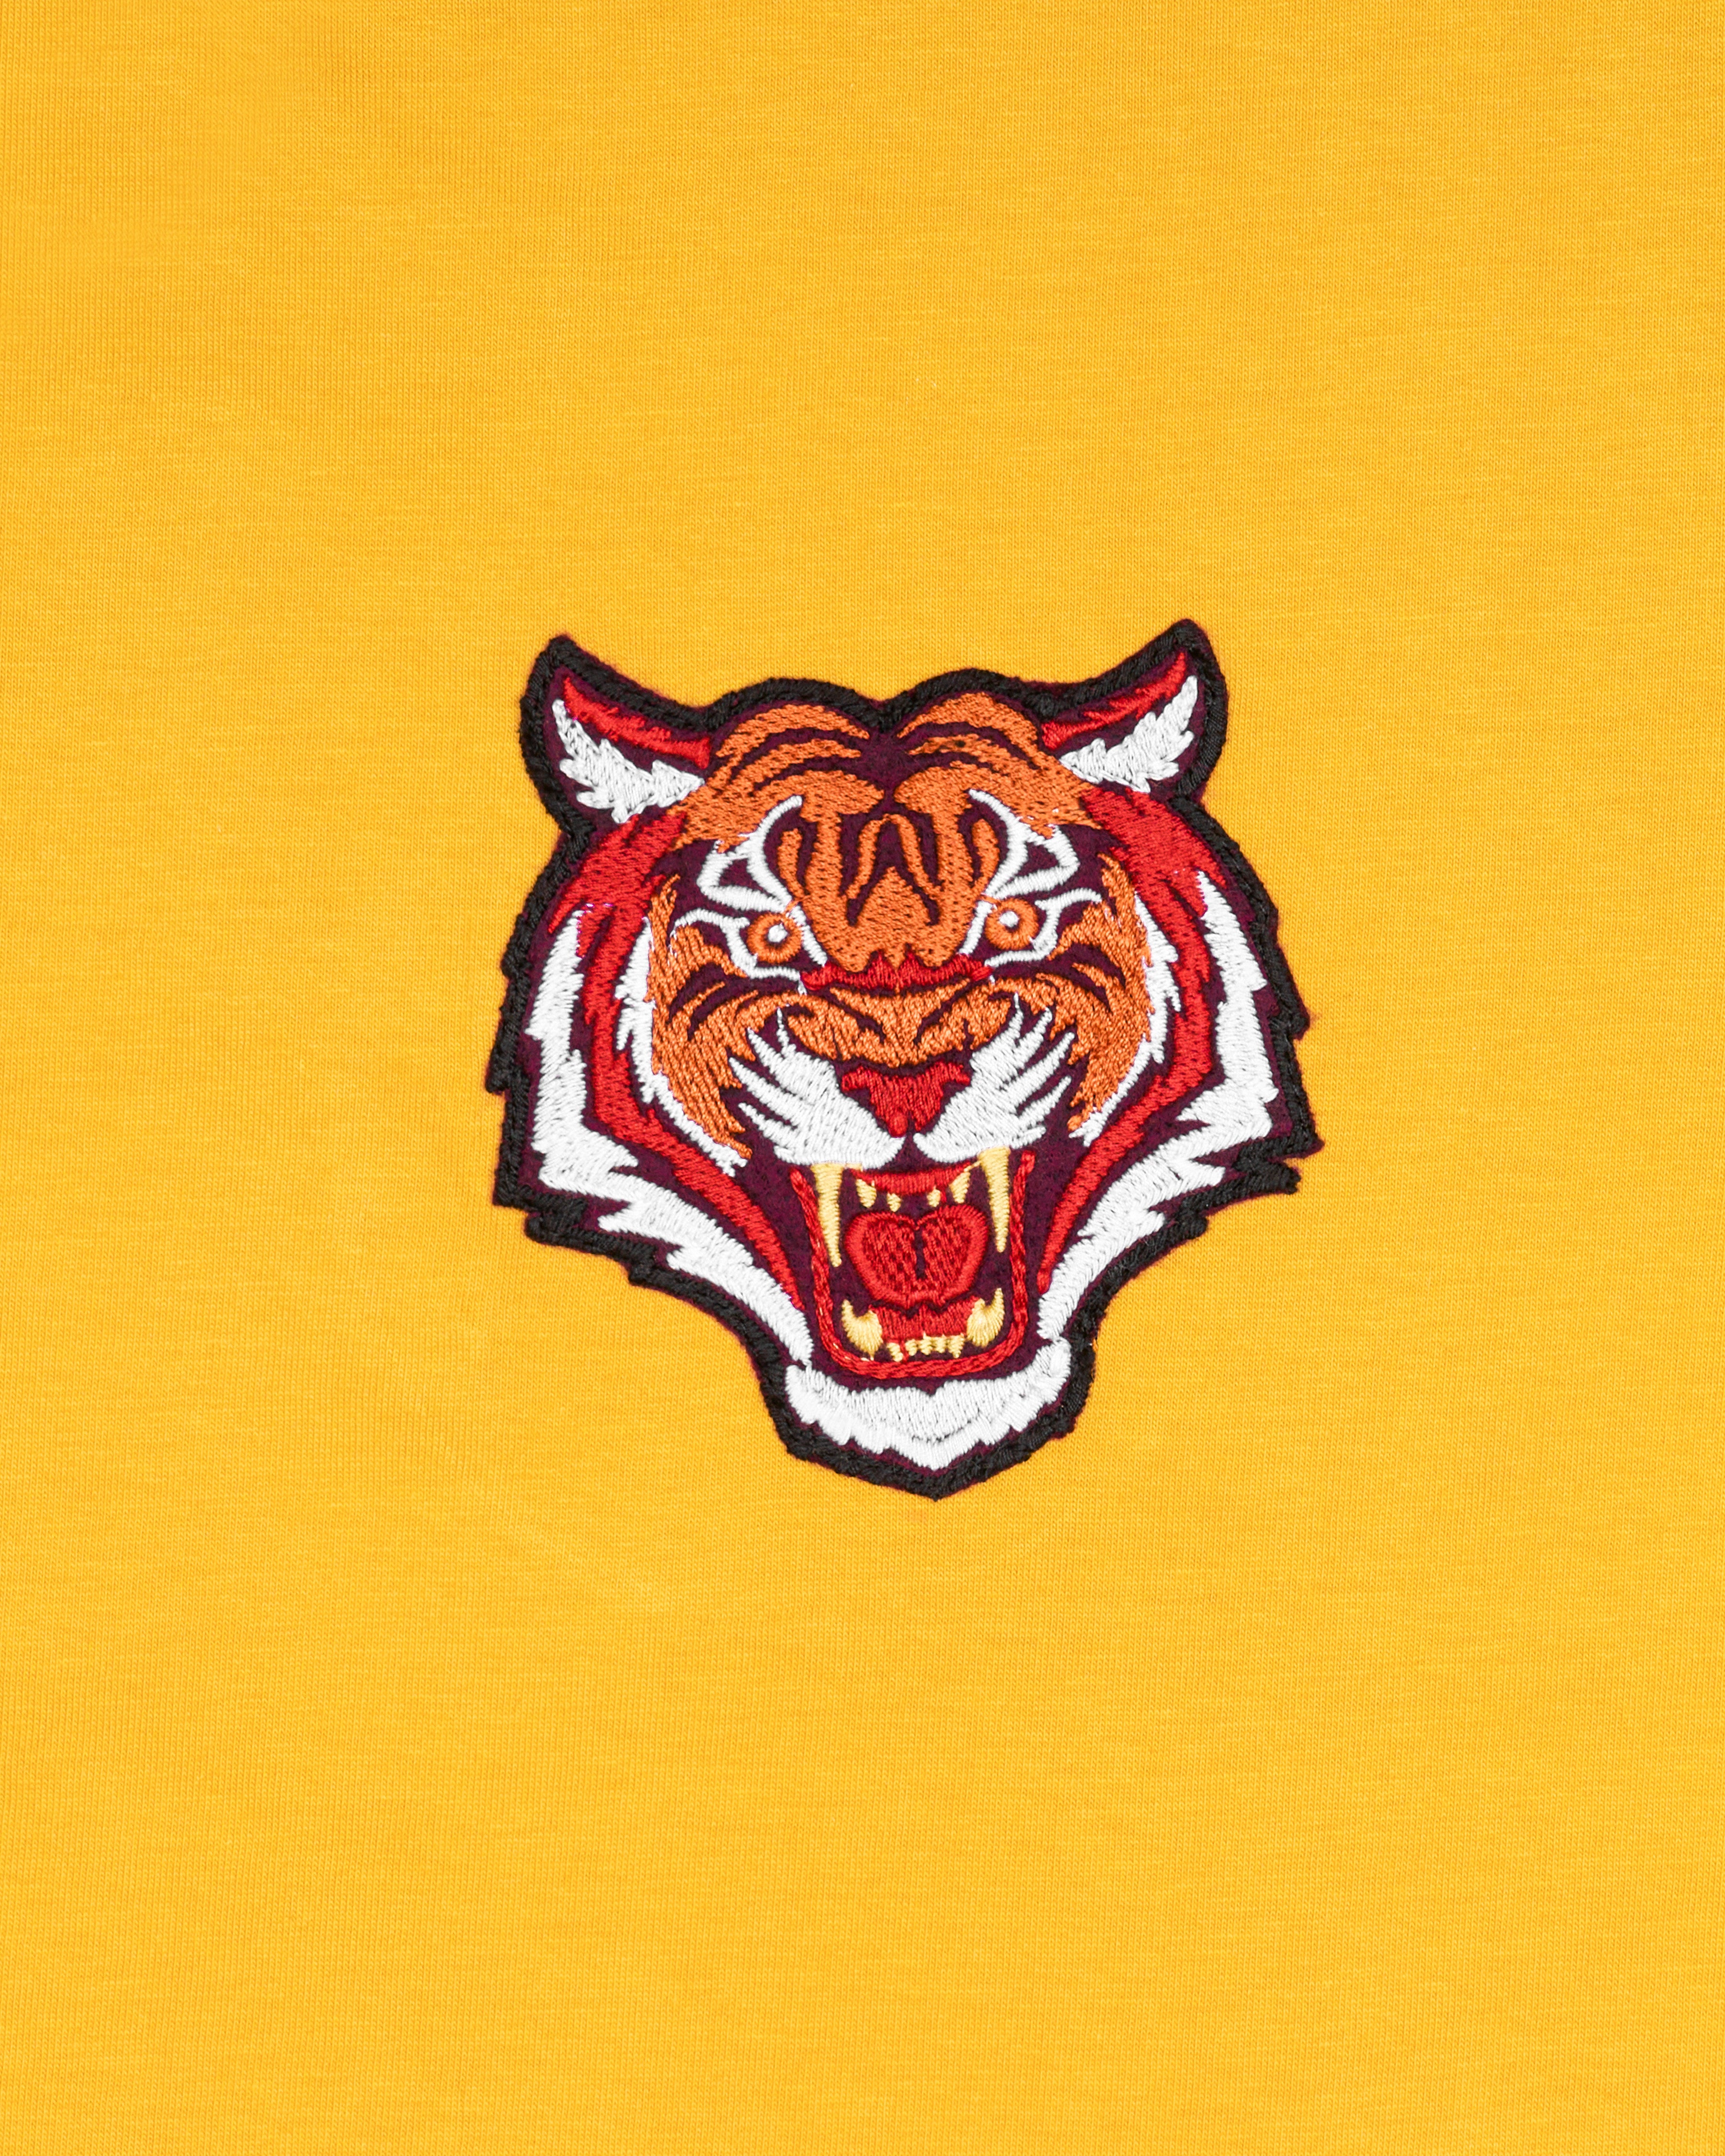 Sandstorm Yellow Tiger Embroidered Organic Cotton T-shirt TS070-W03-S, TS070-W03-M, TS070-W03-L, TS070-W03-XL, TS070-W03-XXL